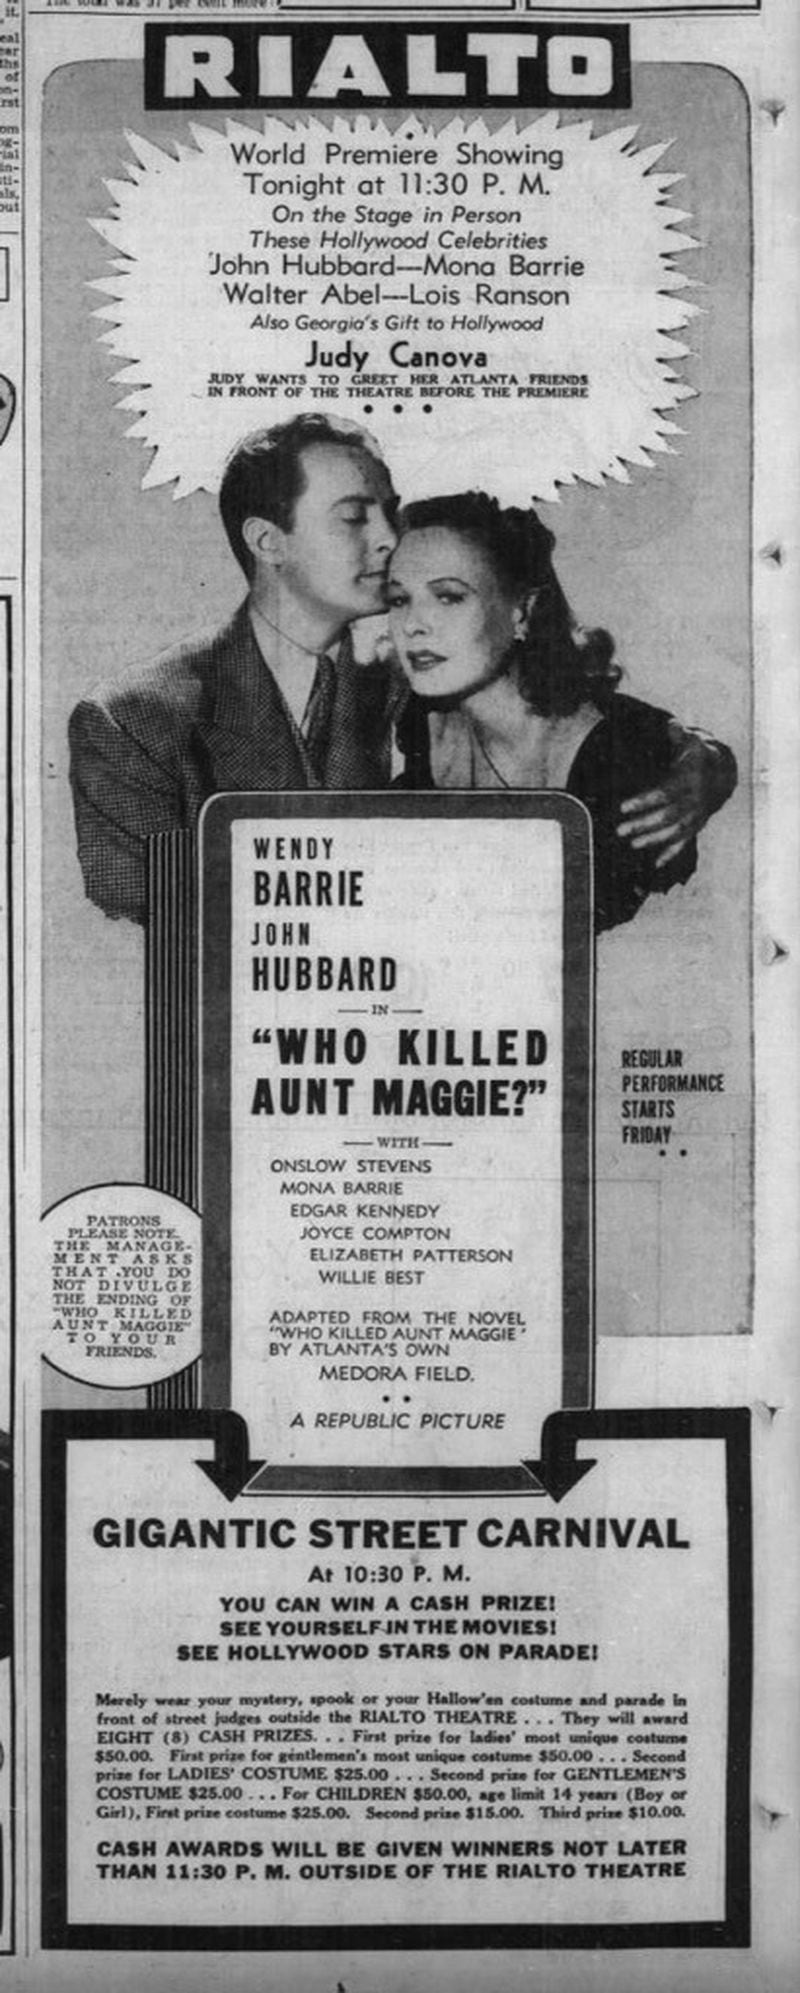 An ad in The Atlanta Constitution in 1940 for a Hollywood-style premiere of the film "Who Killed Aunt Maggie?" at the Rialto. AJC FILE